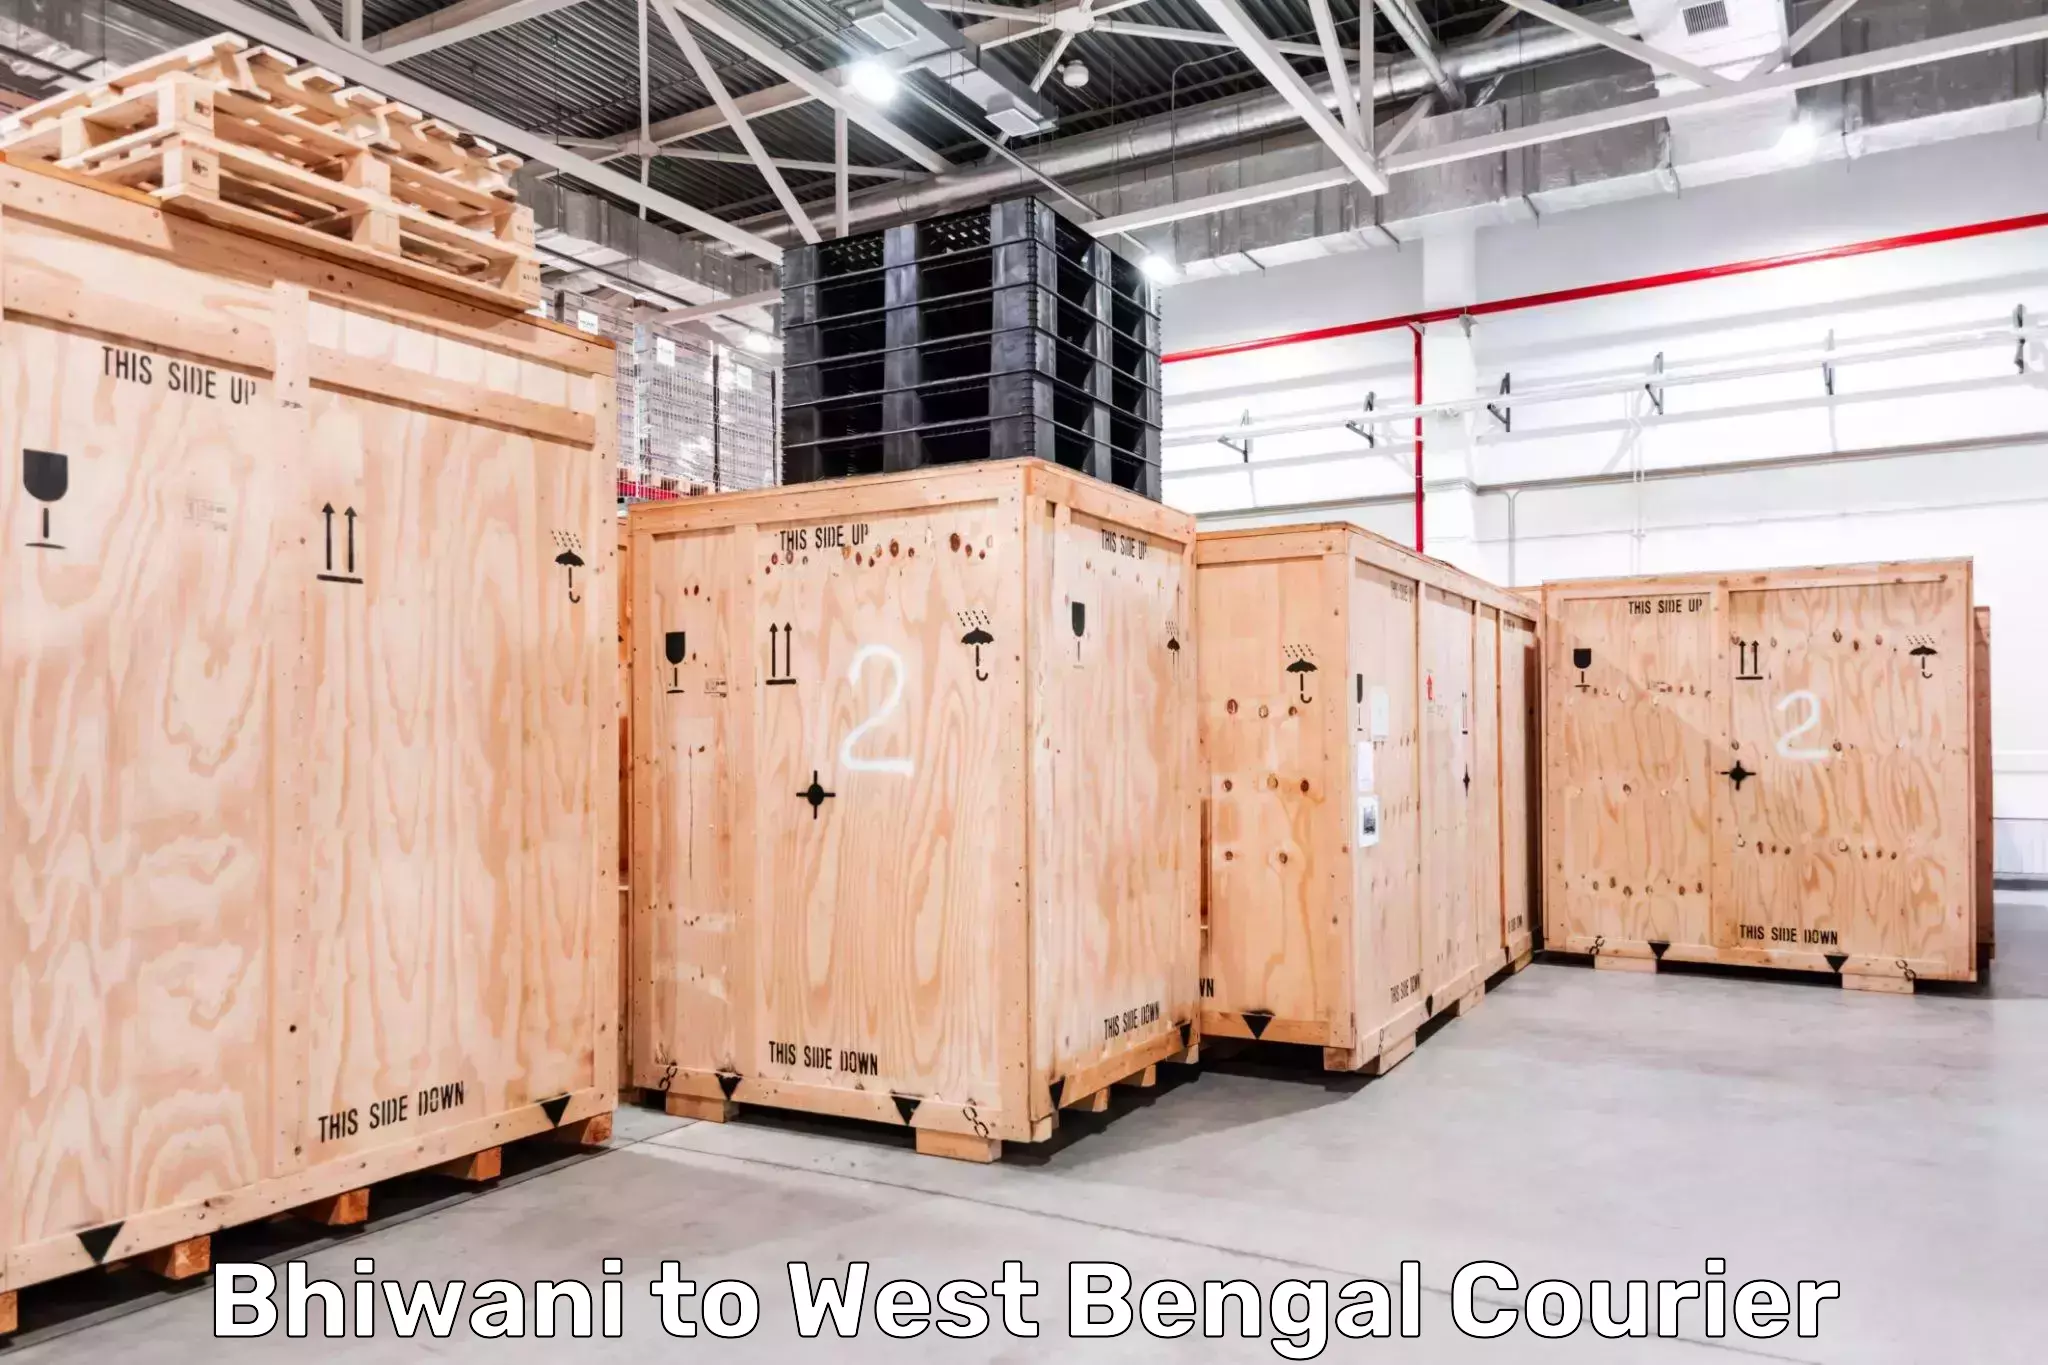 Package delivery network Bhiwani to Kolkata Port